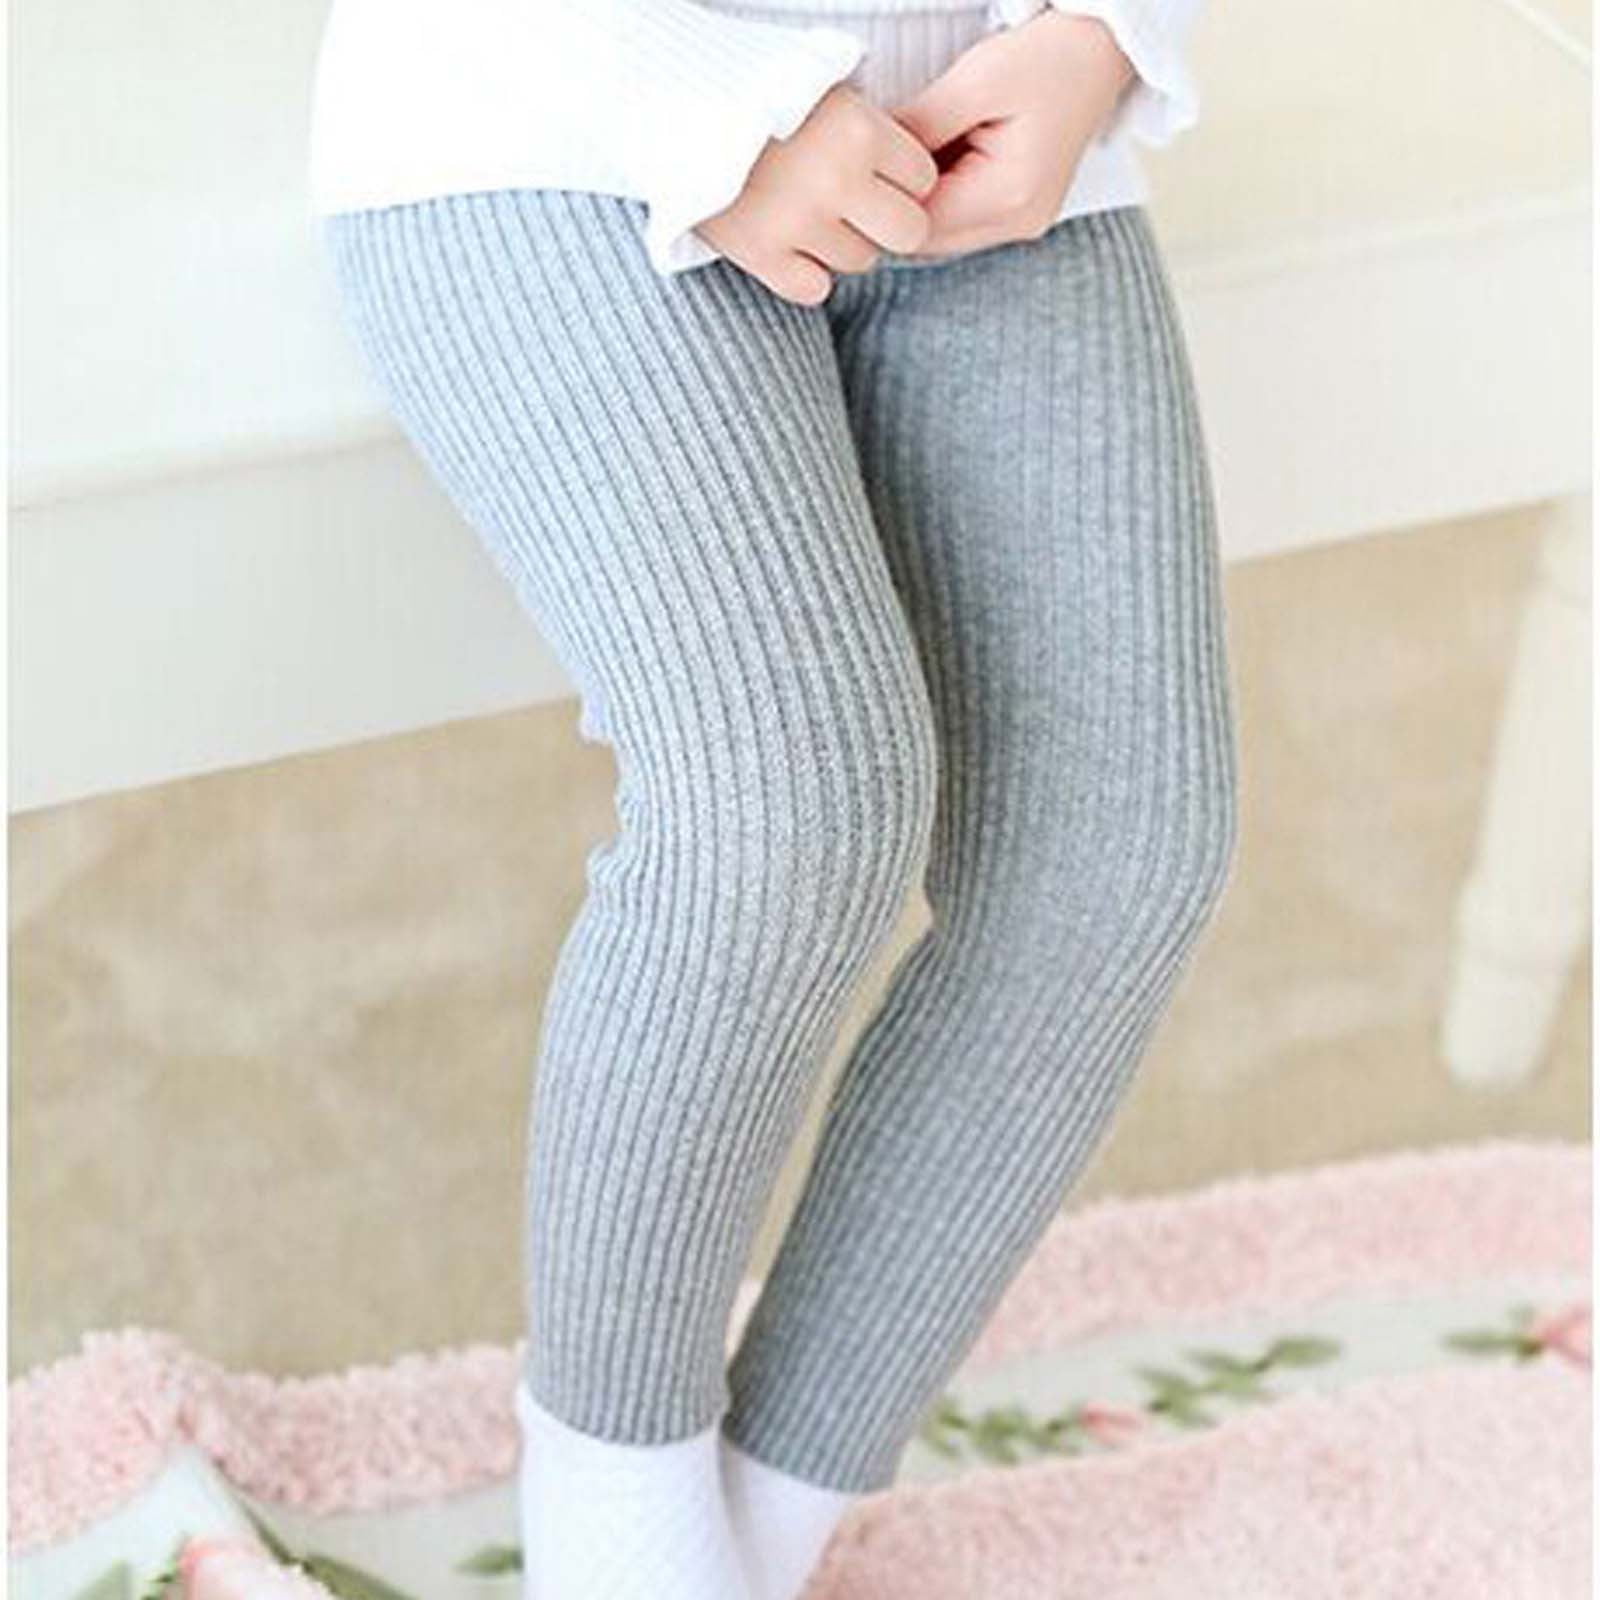 Girl's knitted leggings with flared legs